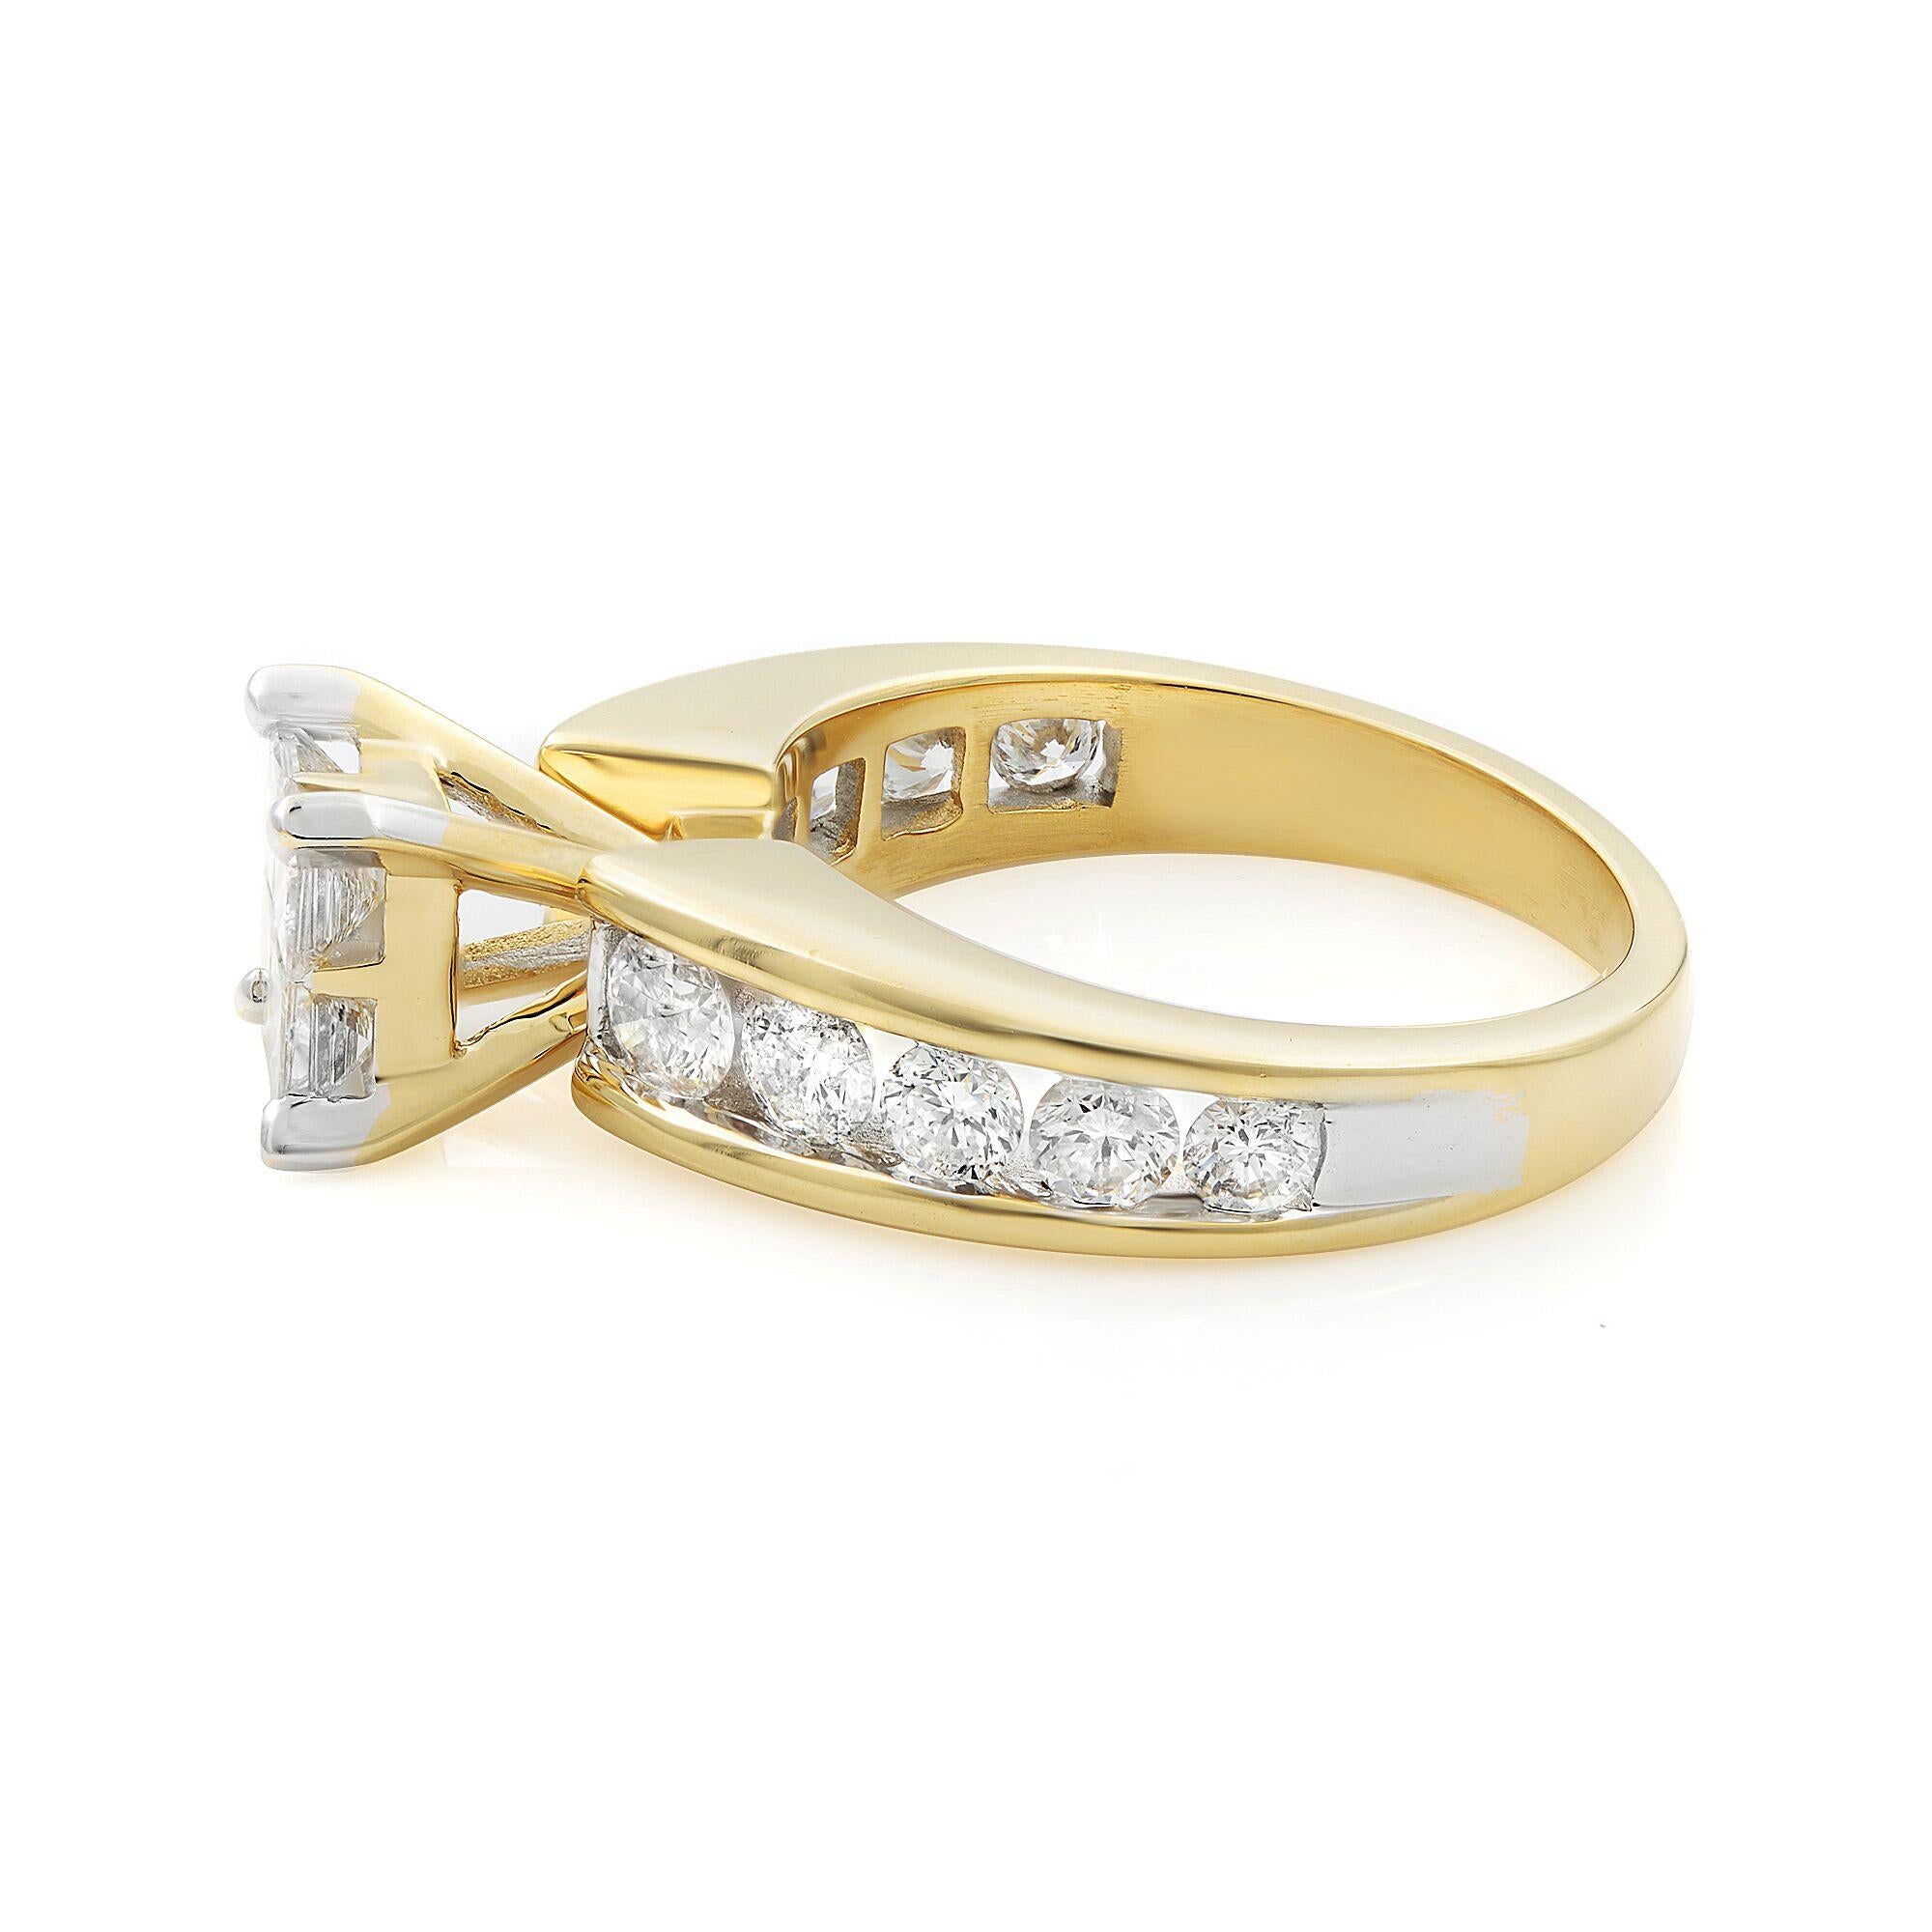 14K yellow gold engagement ring, features 4 princess-cut diamonds at a center, flanked by a round cut channel set diamonds on each side of the shank. Diamond are totaling in 2.00 carat with a VS2 clarity and G-J color. Ring size 7.